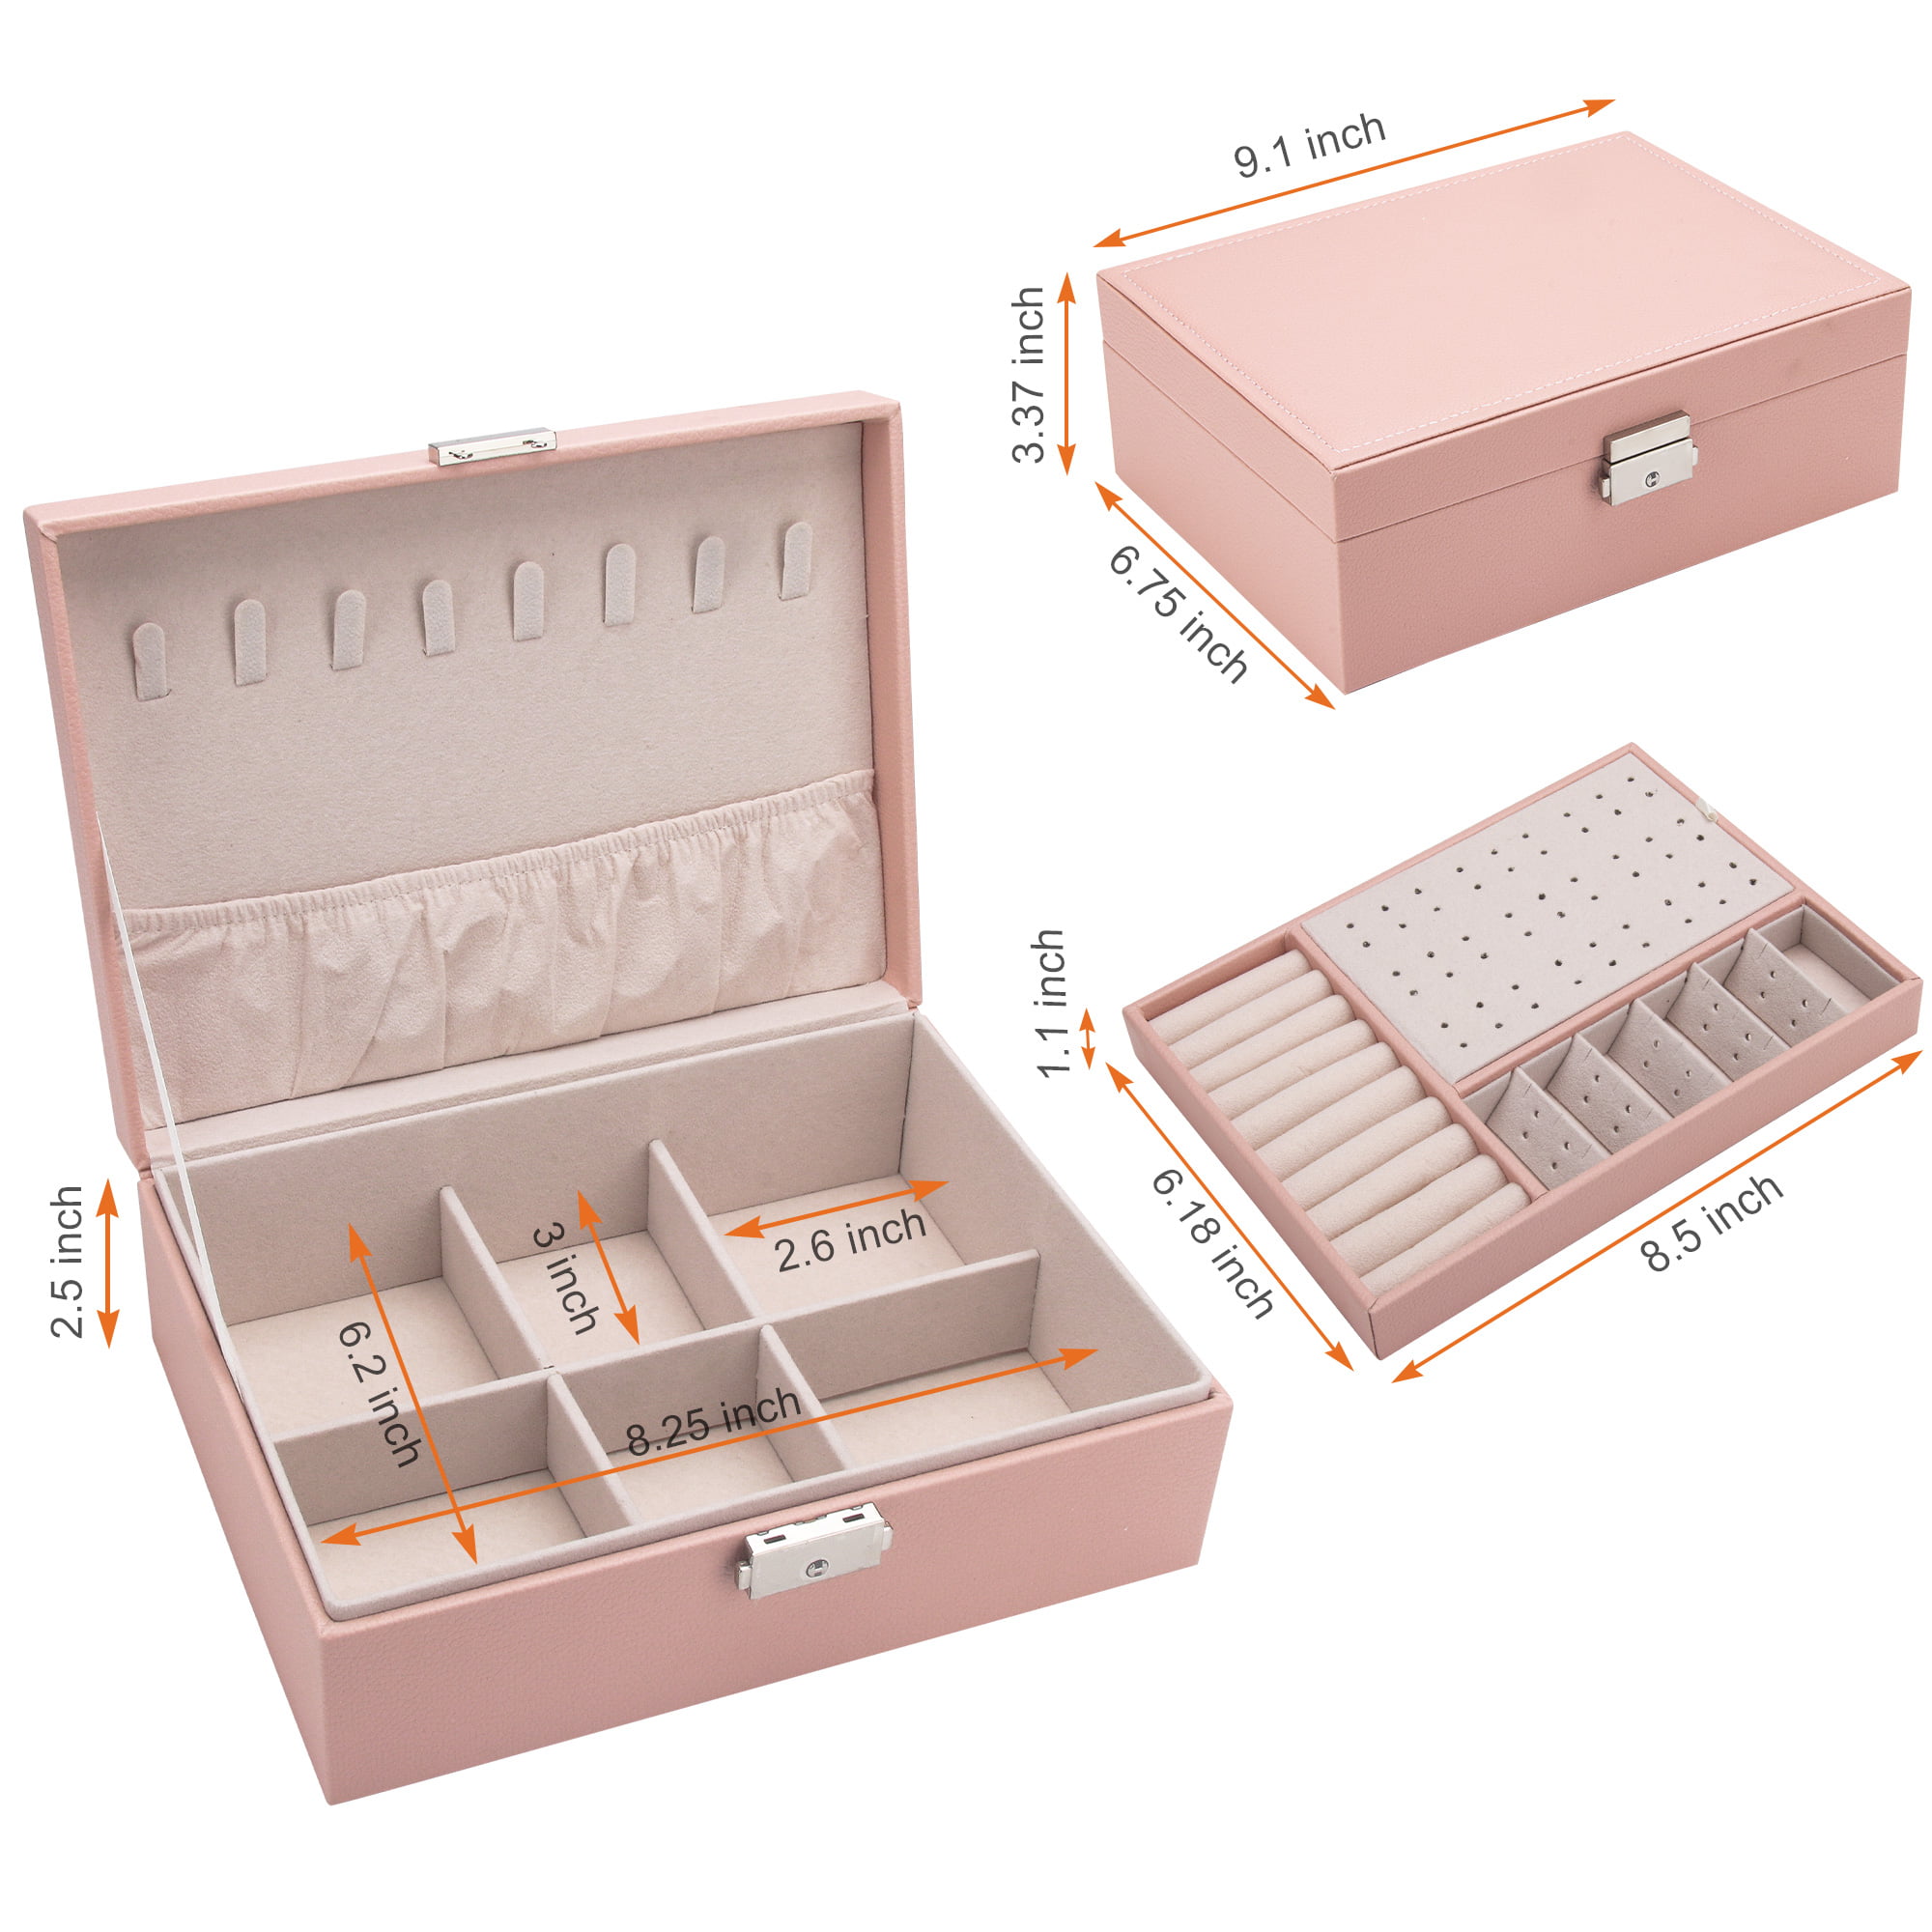  DECOR4SEASON PU Leather Jewelry Box Organizer with 2 Layer  Display Storage Cases and Removable Tray for Necklace, Earrings, Rings,  Bracelets for Women Girls Gift, Pink : Clothing, Shoes & Jewelry